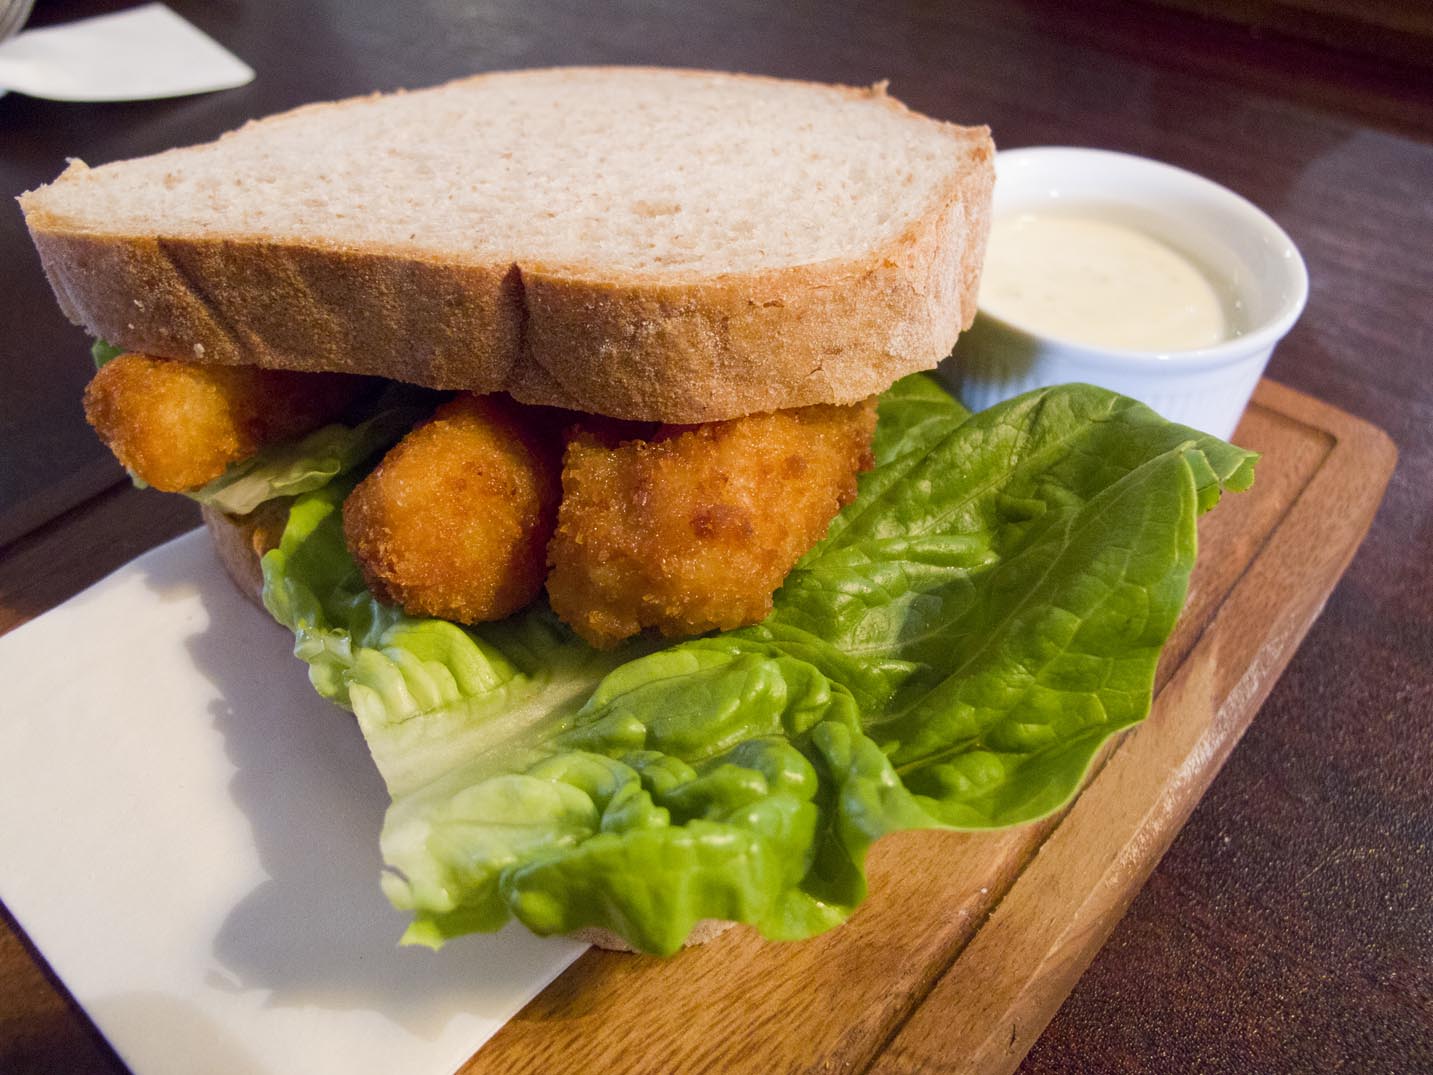 A fish finger sandwich with lettuce and tartar sauce from a pub in London, England